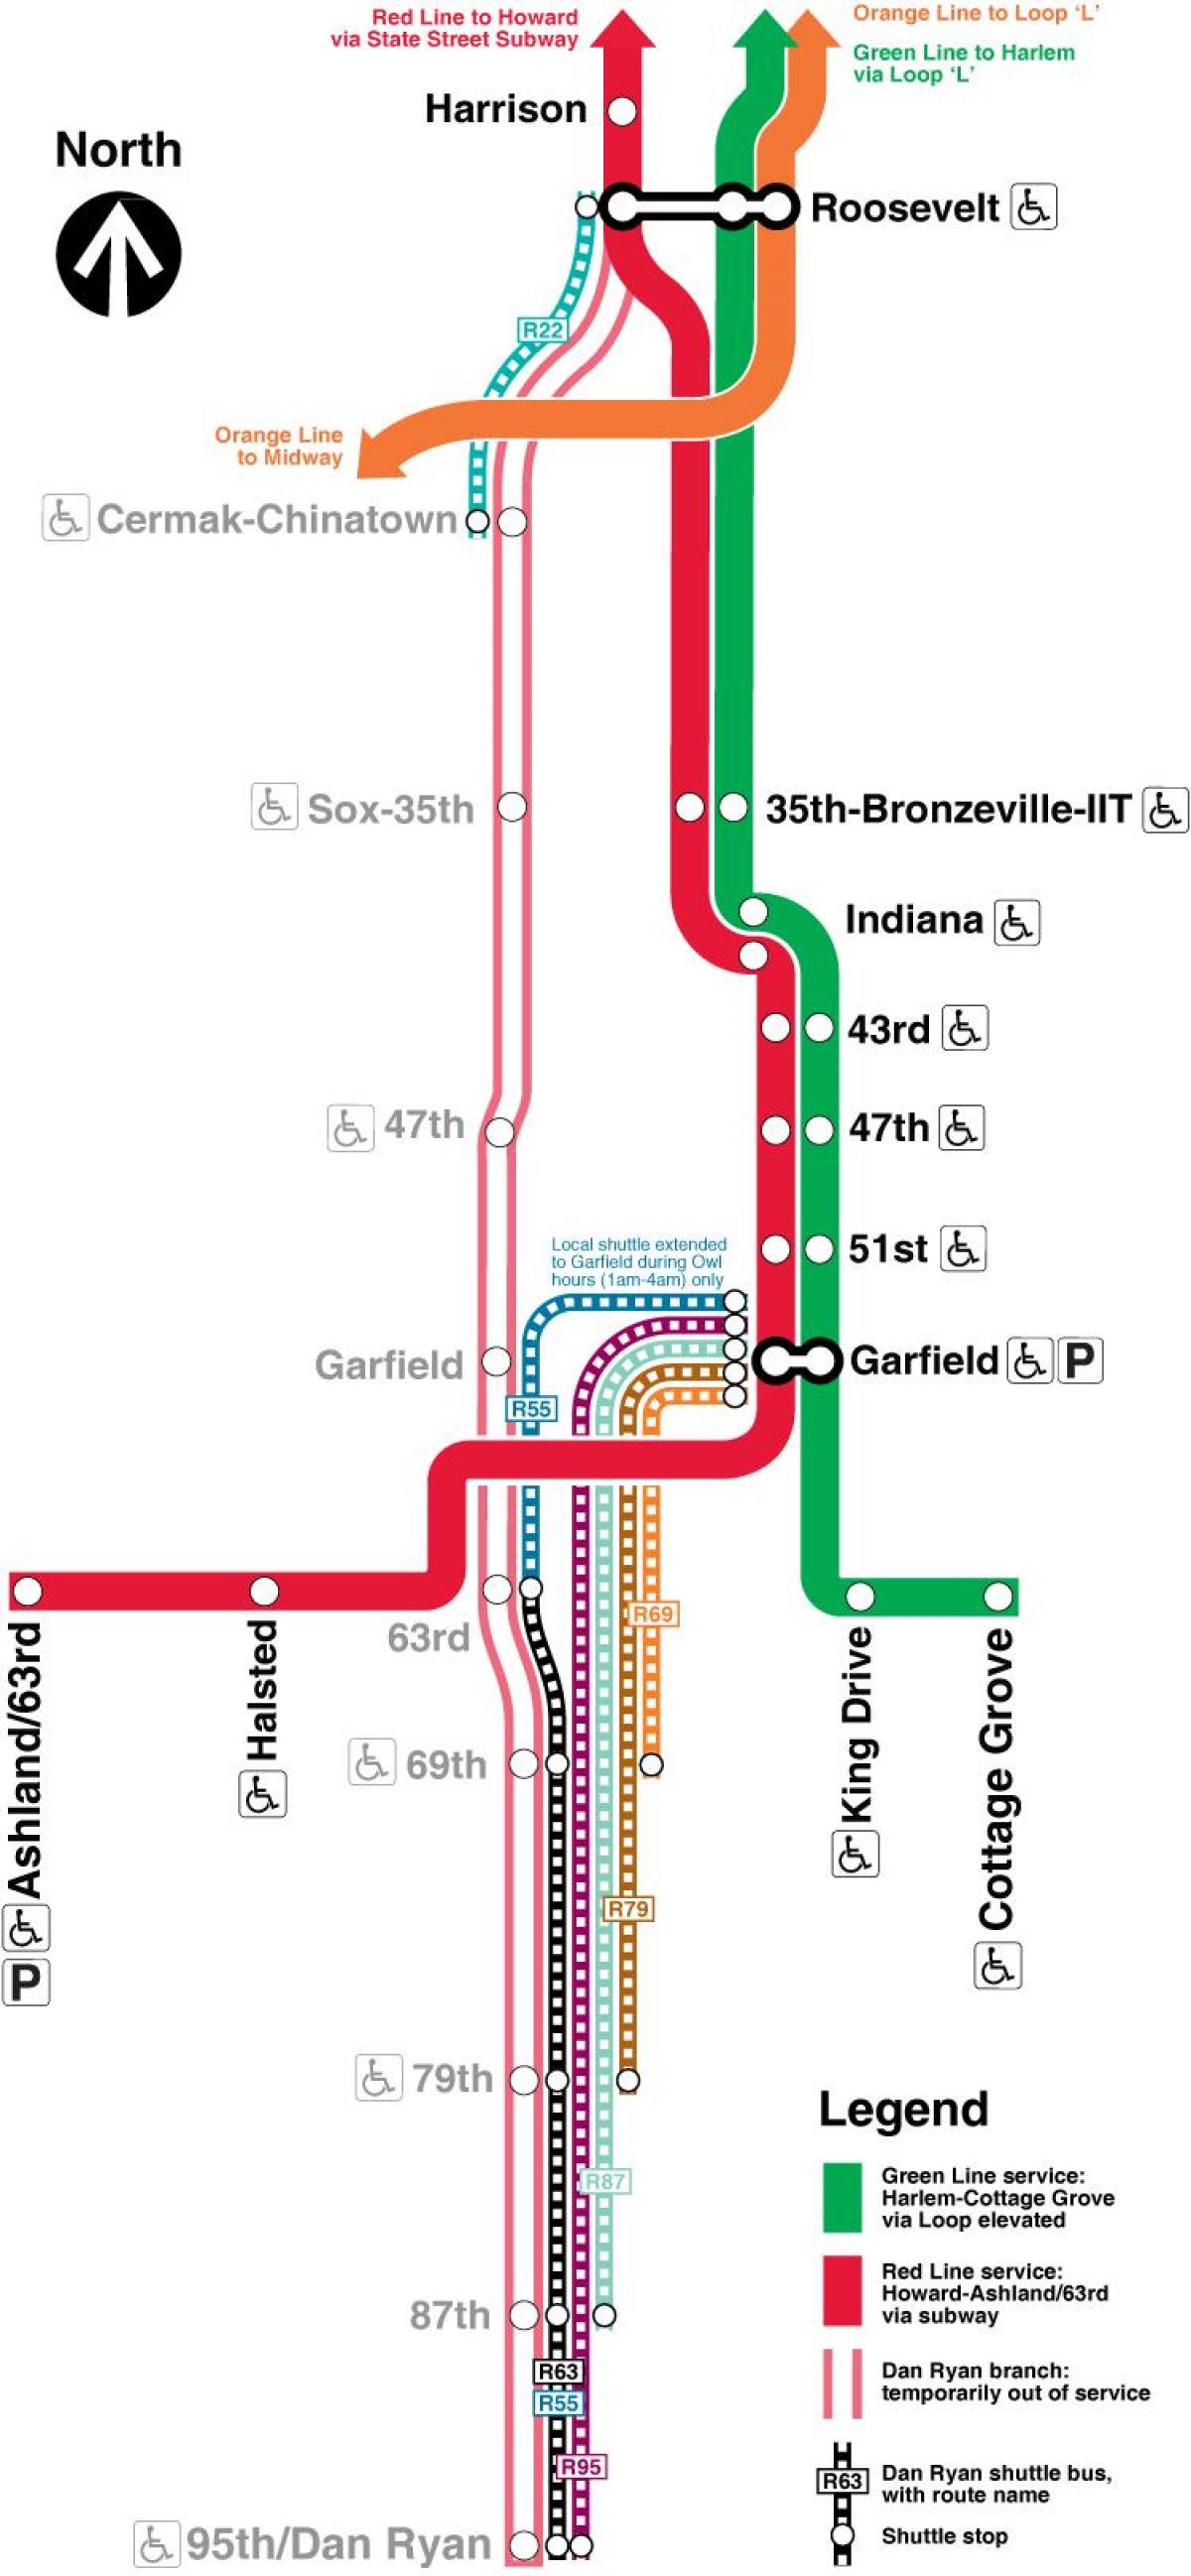 Chicago cta red line map